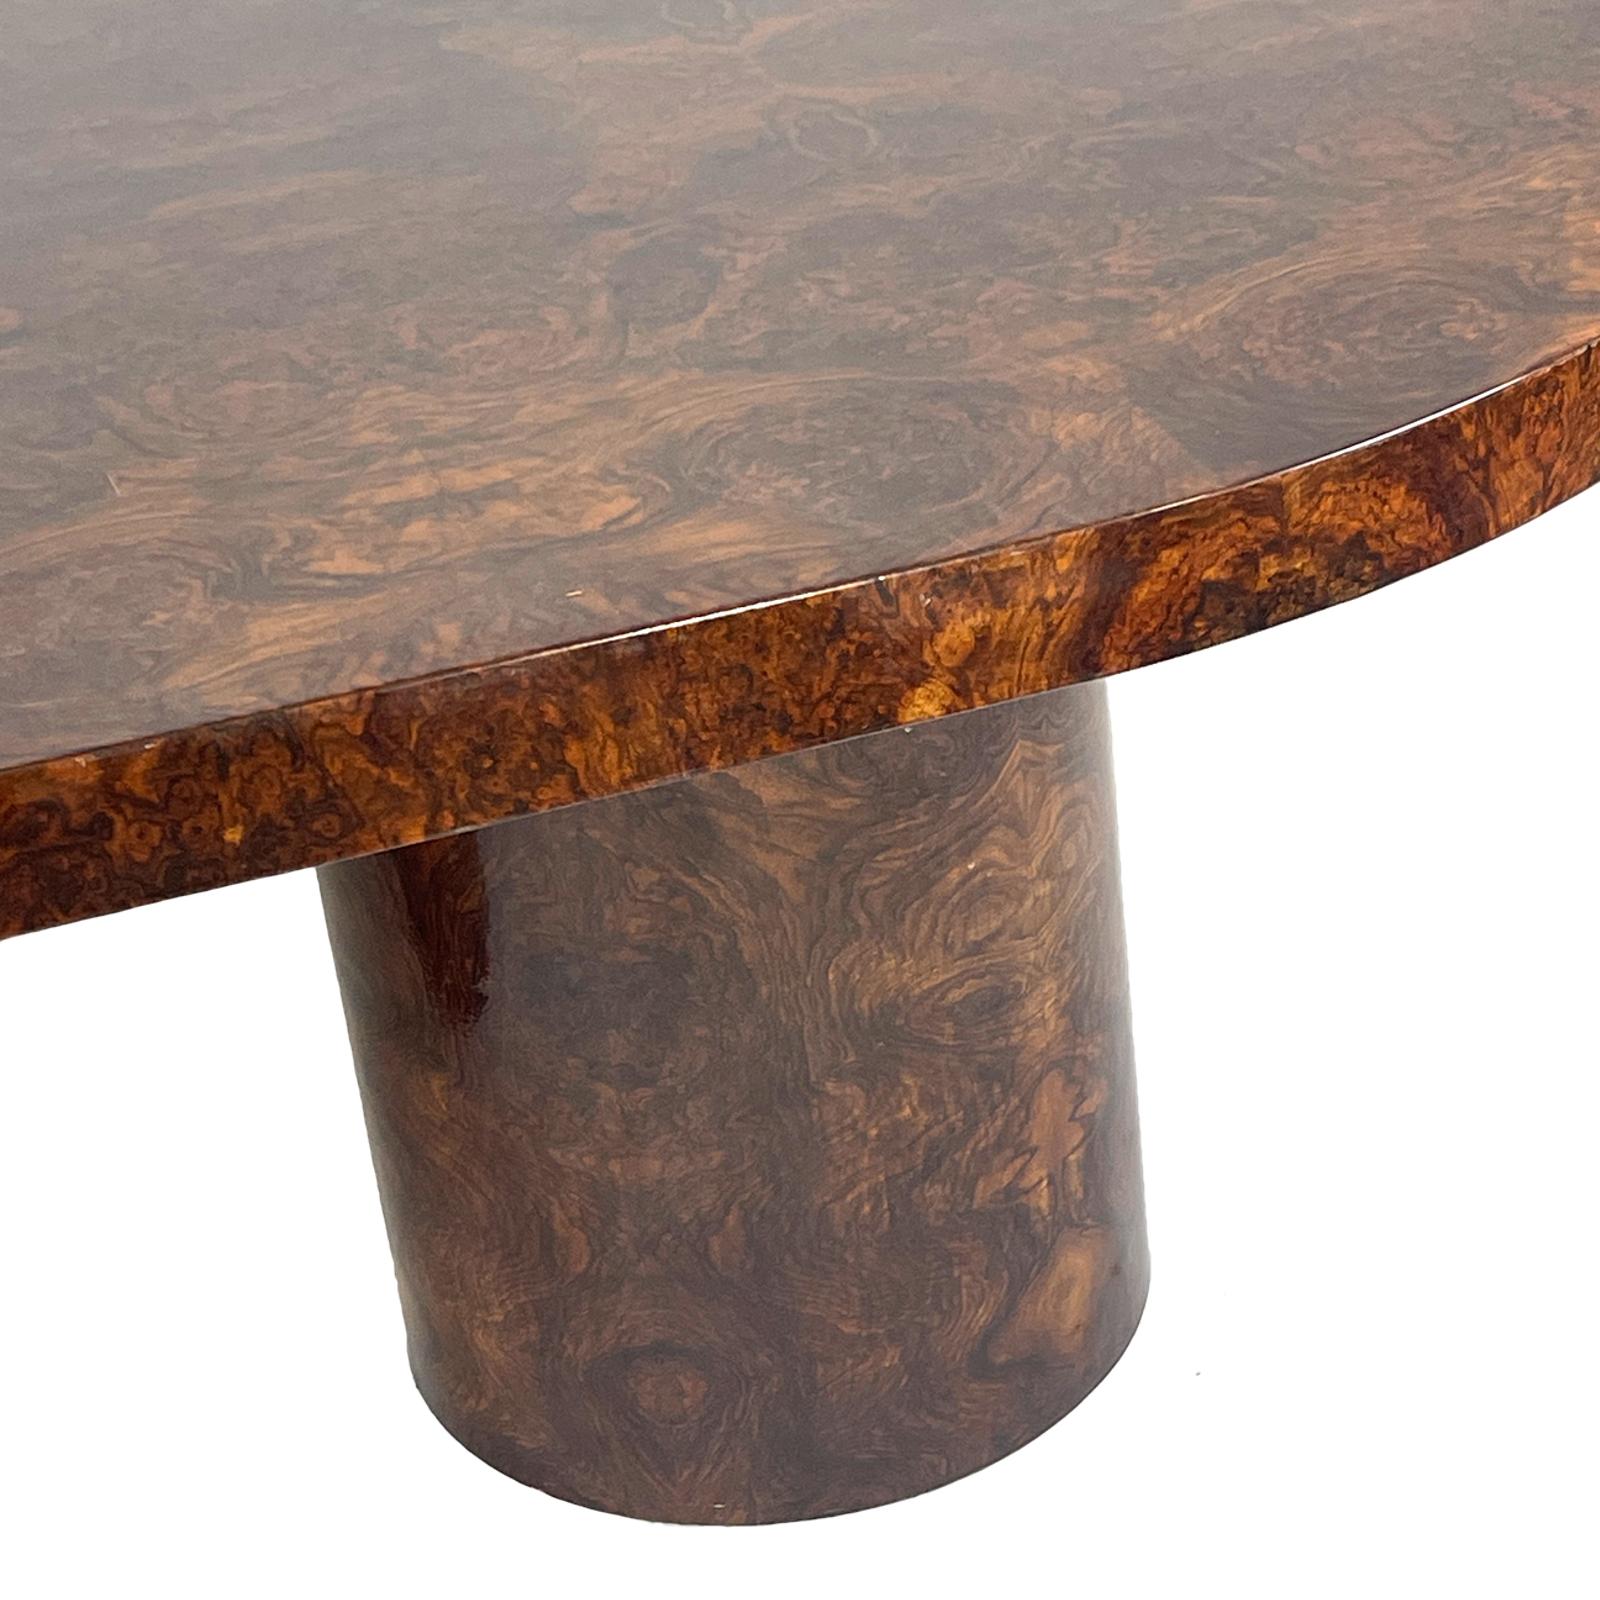 Absolutely stunning burled mahogany dining table with matching cylindric shaped bases, The action in the bookmatched burled mahogany top is exceptional. The high gloss lacquer finish is in very good original condition adding an amazing level of